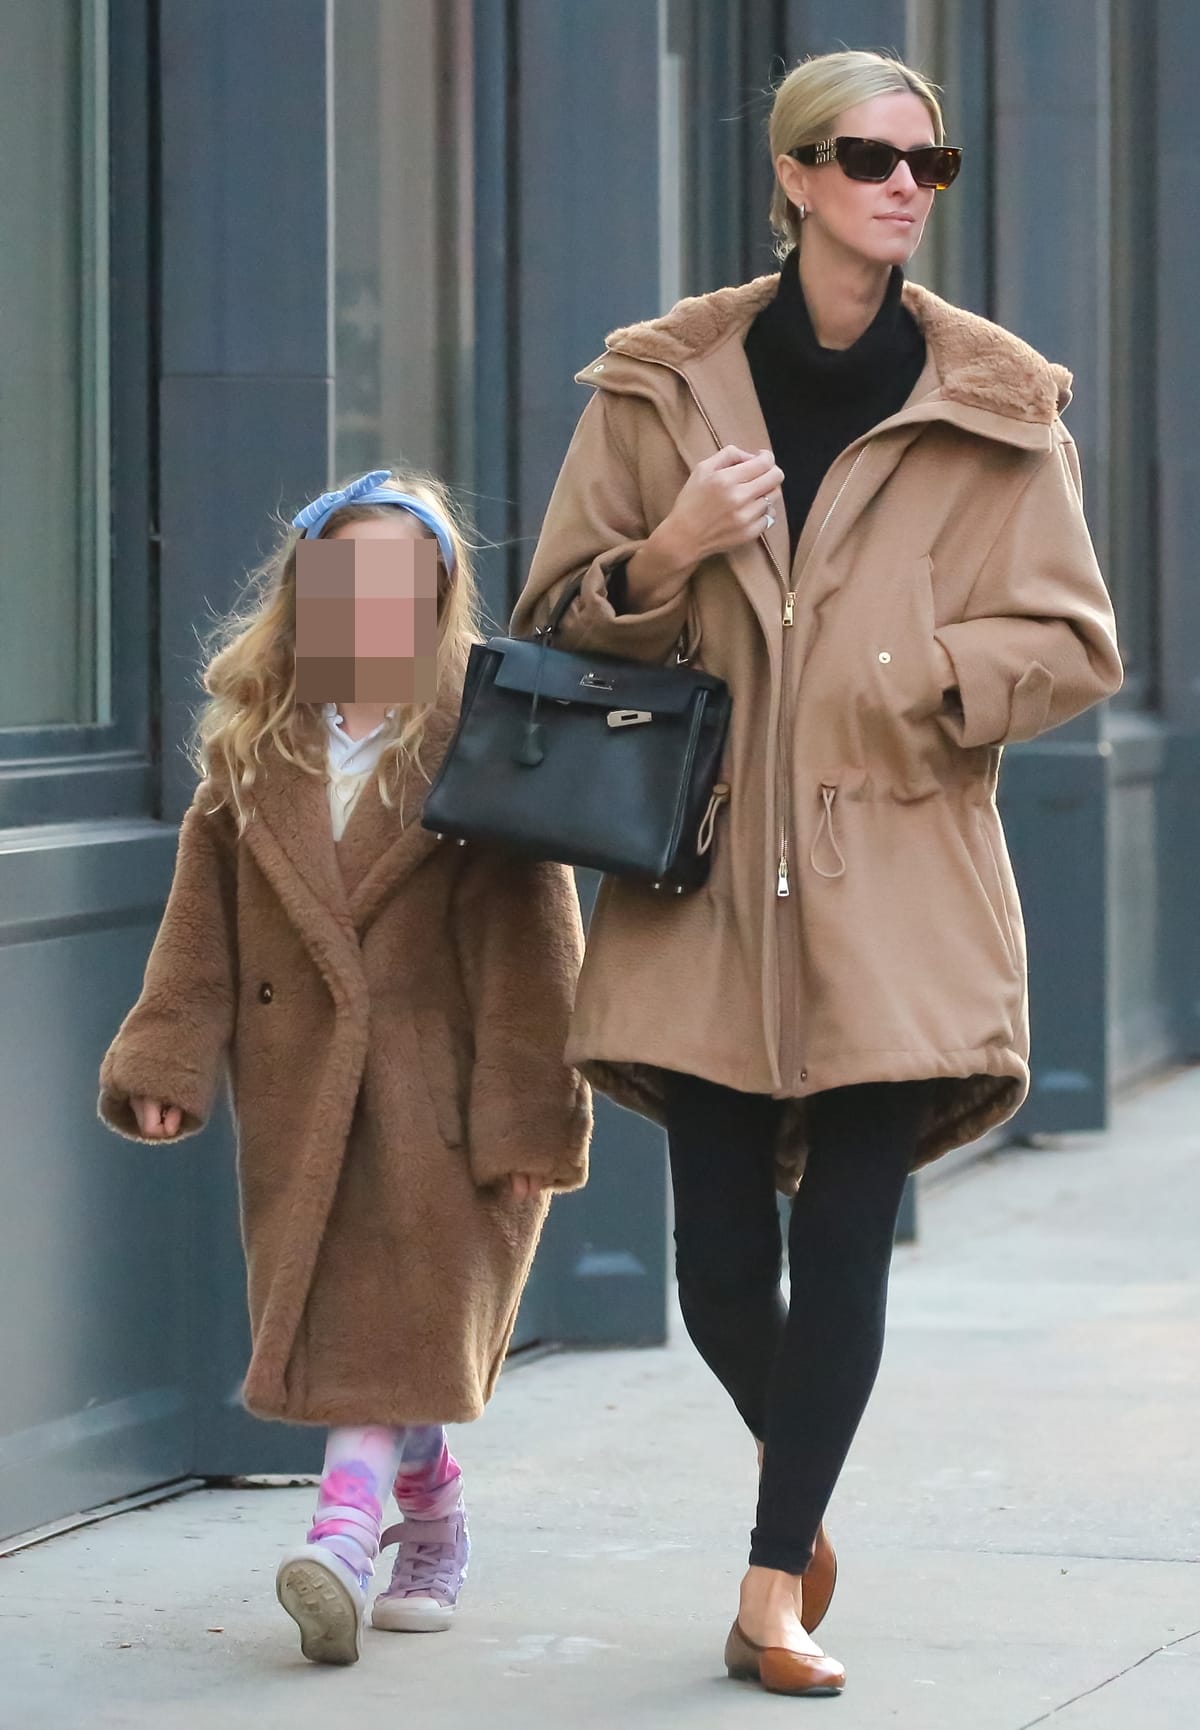 Clad in a sophisticated black and tan ensemble, Nicky Hilton Rothschild's winter style blends chic comfort with her signature fashion flair, as she navigates the city's vibrant streets